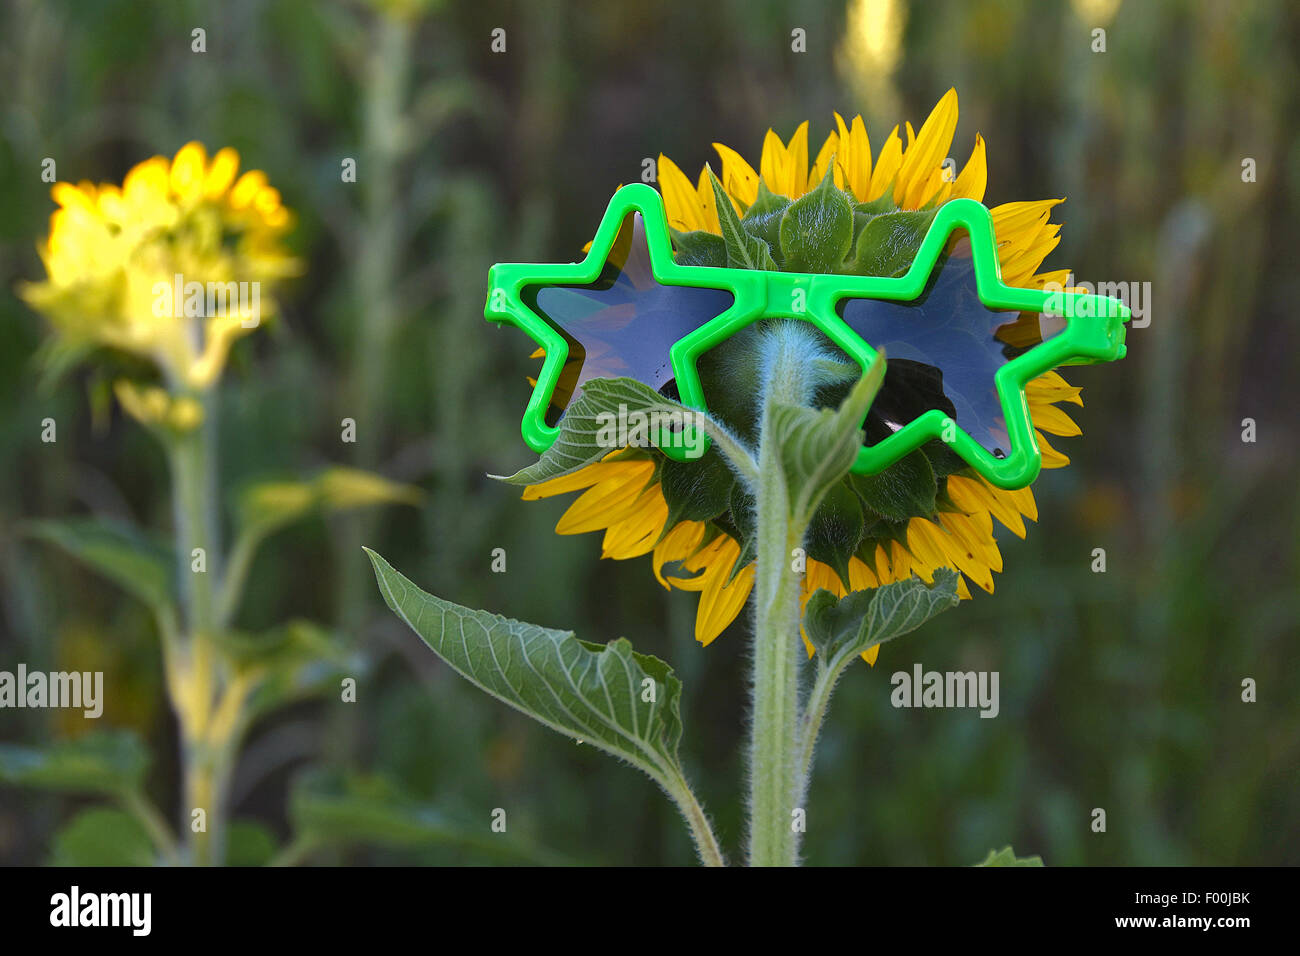 Green star sunglasses on back side of a sunflower in a field of sunflowers. Stock Photo